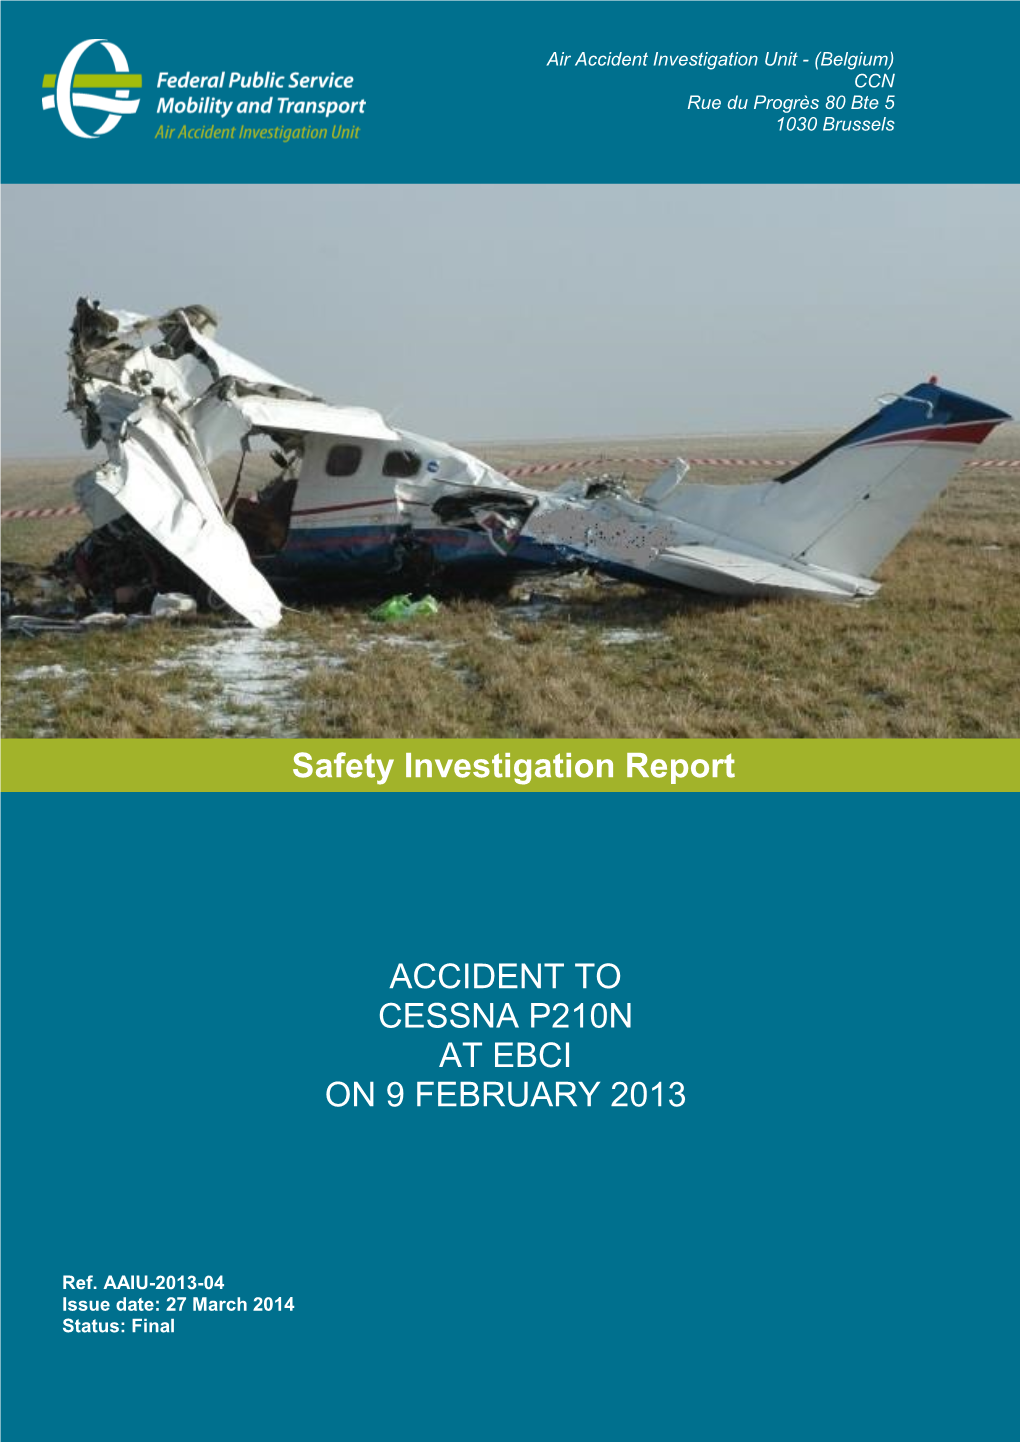 Accident to Cessna P210n at Ebci on 9 February 2013